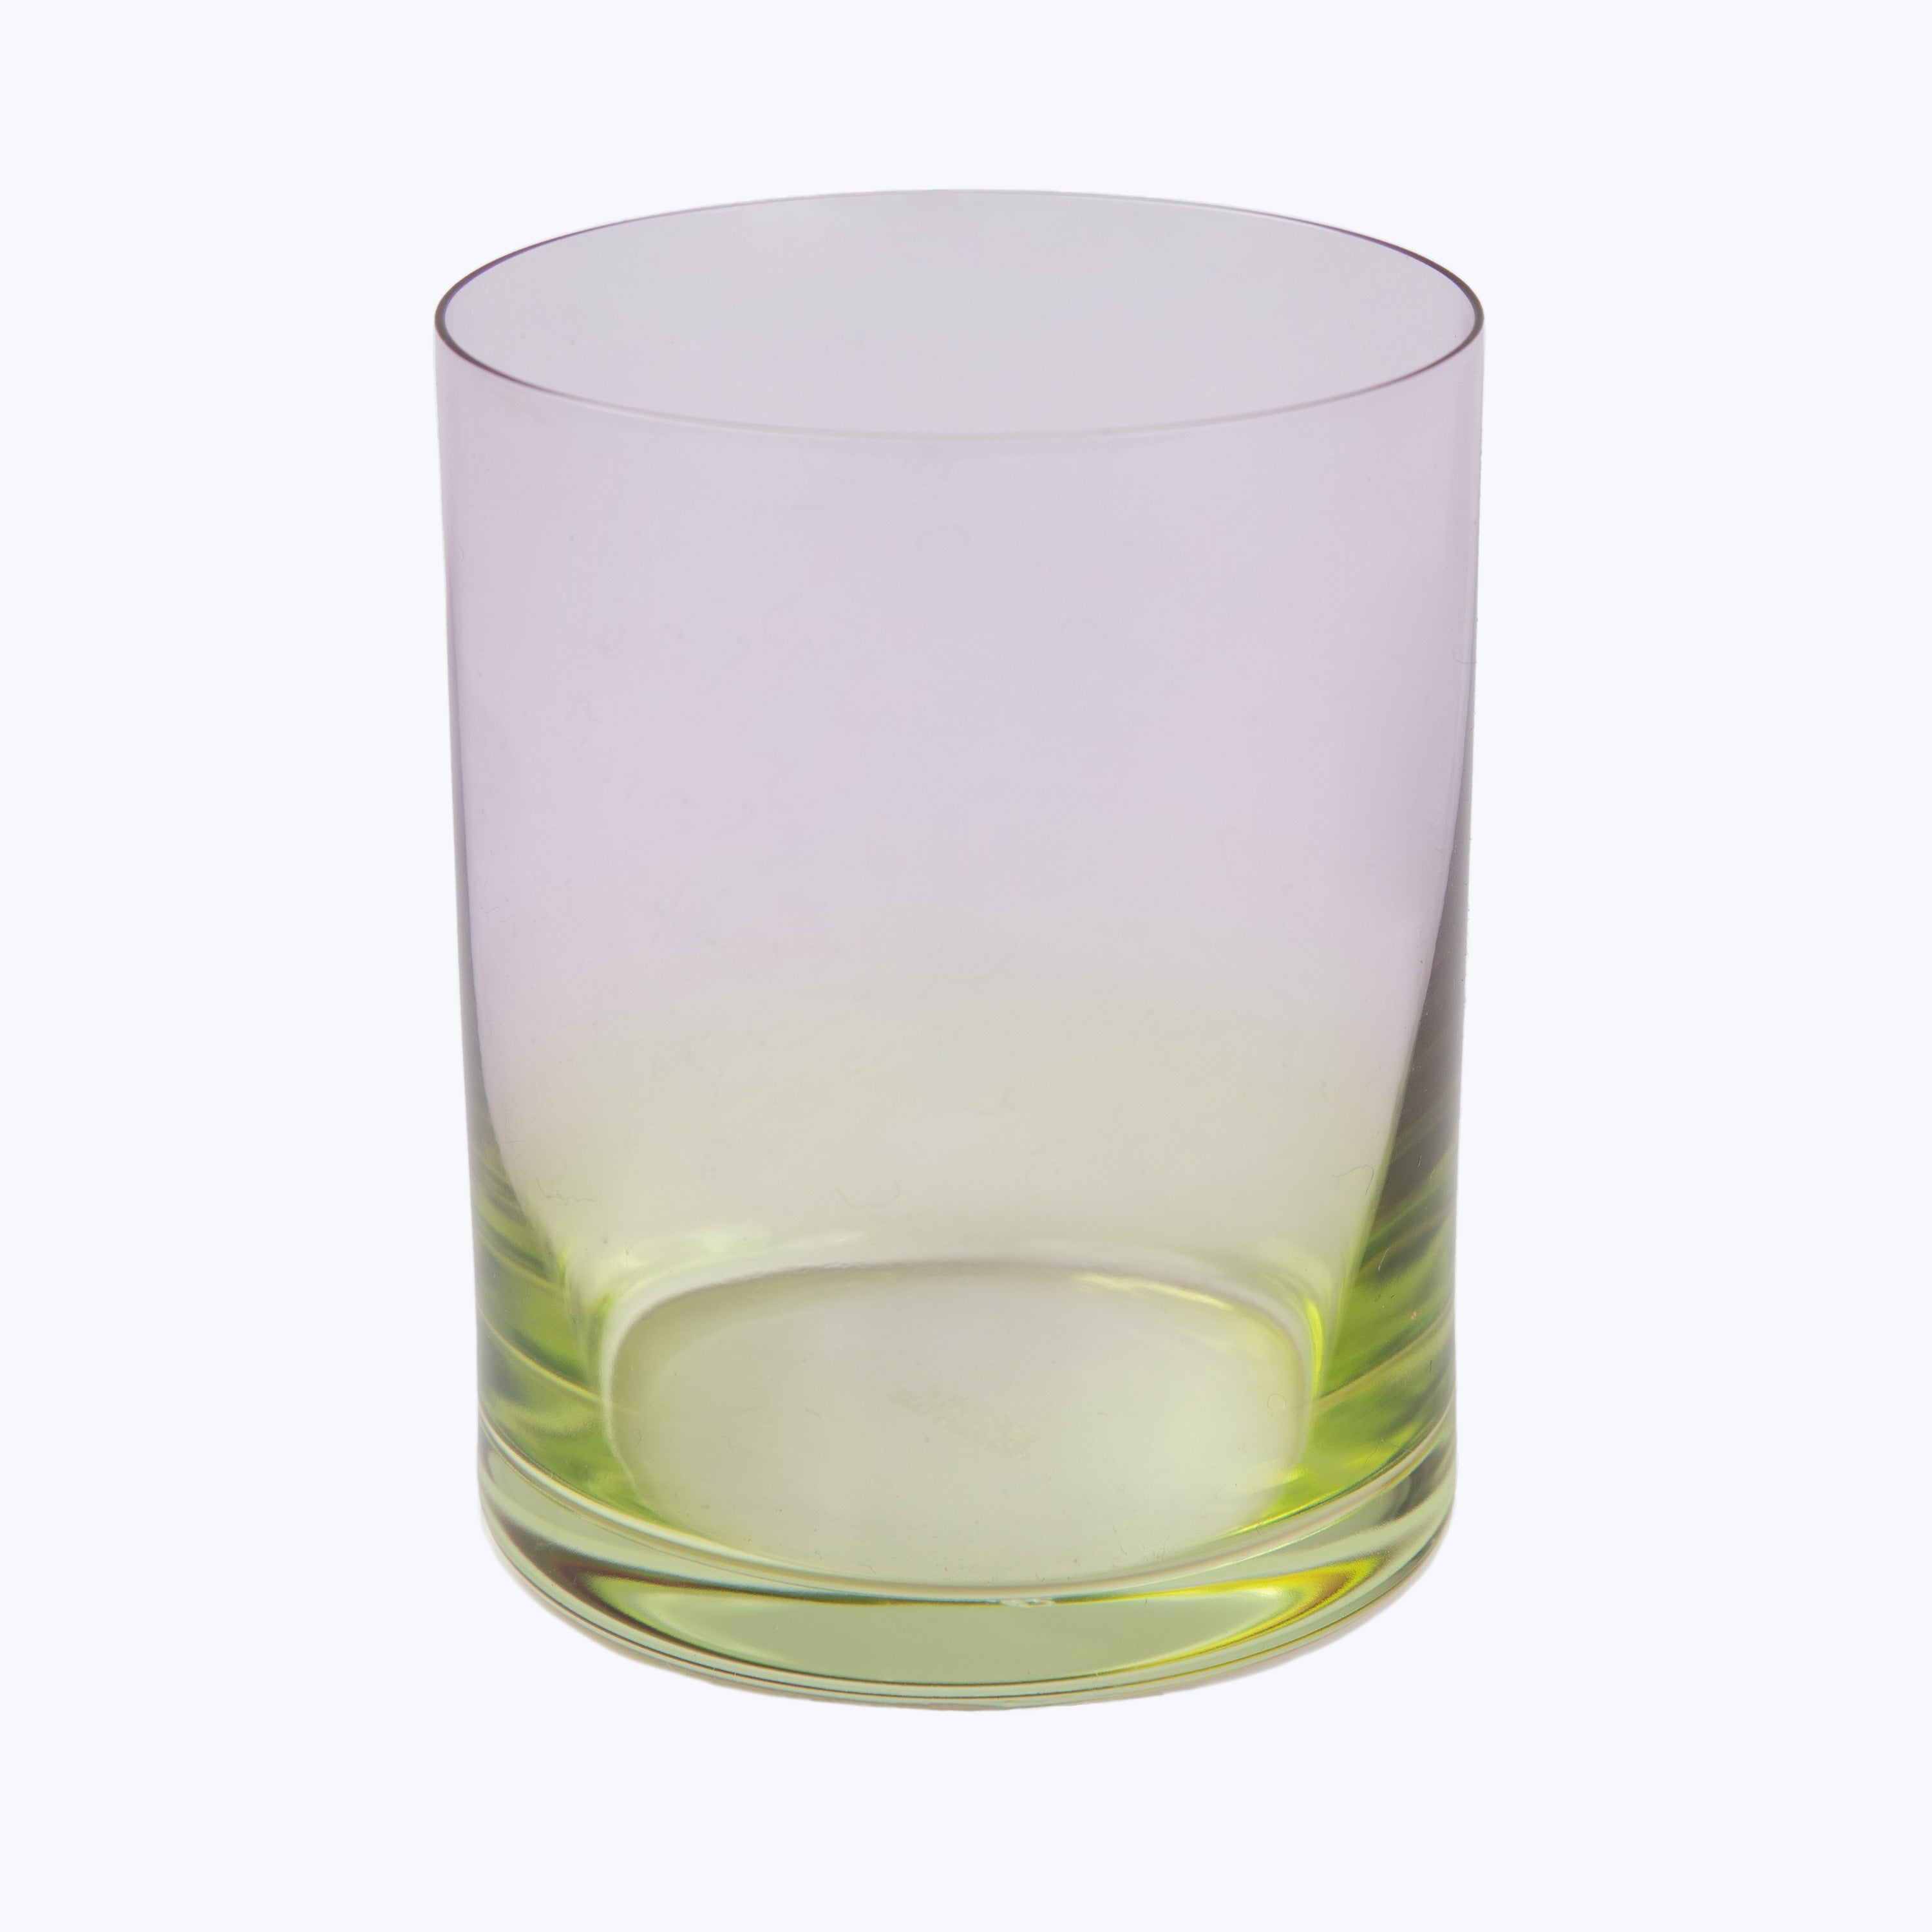 Seasons Old Fashioned Glass Spring Ombre Lavender/Green